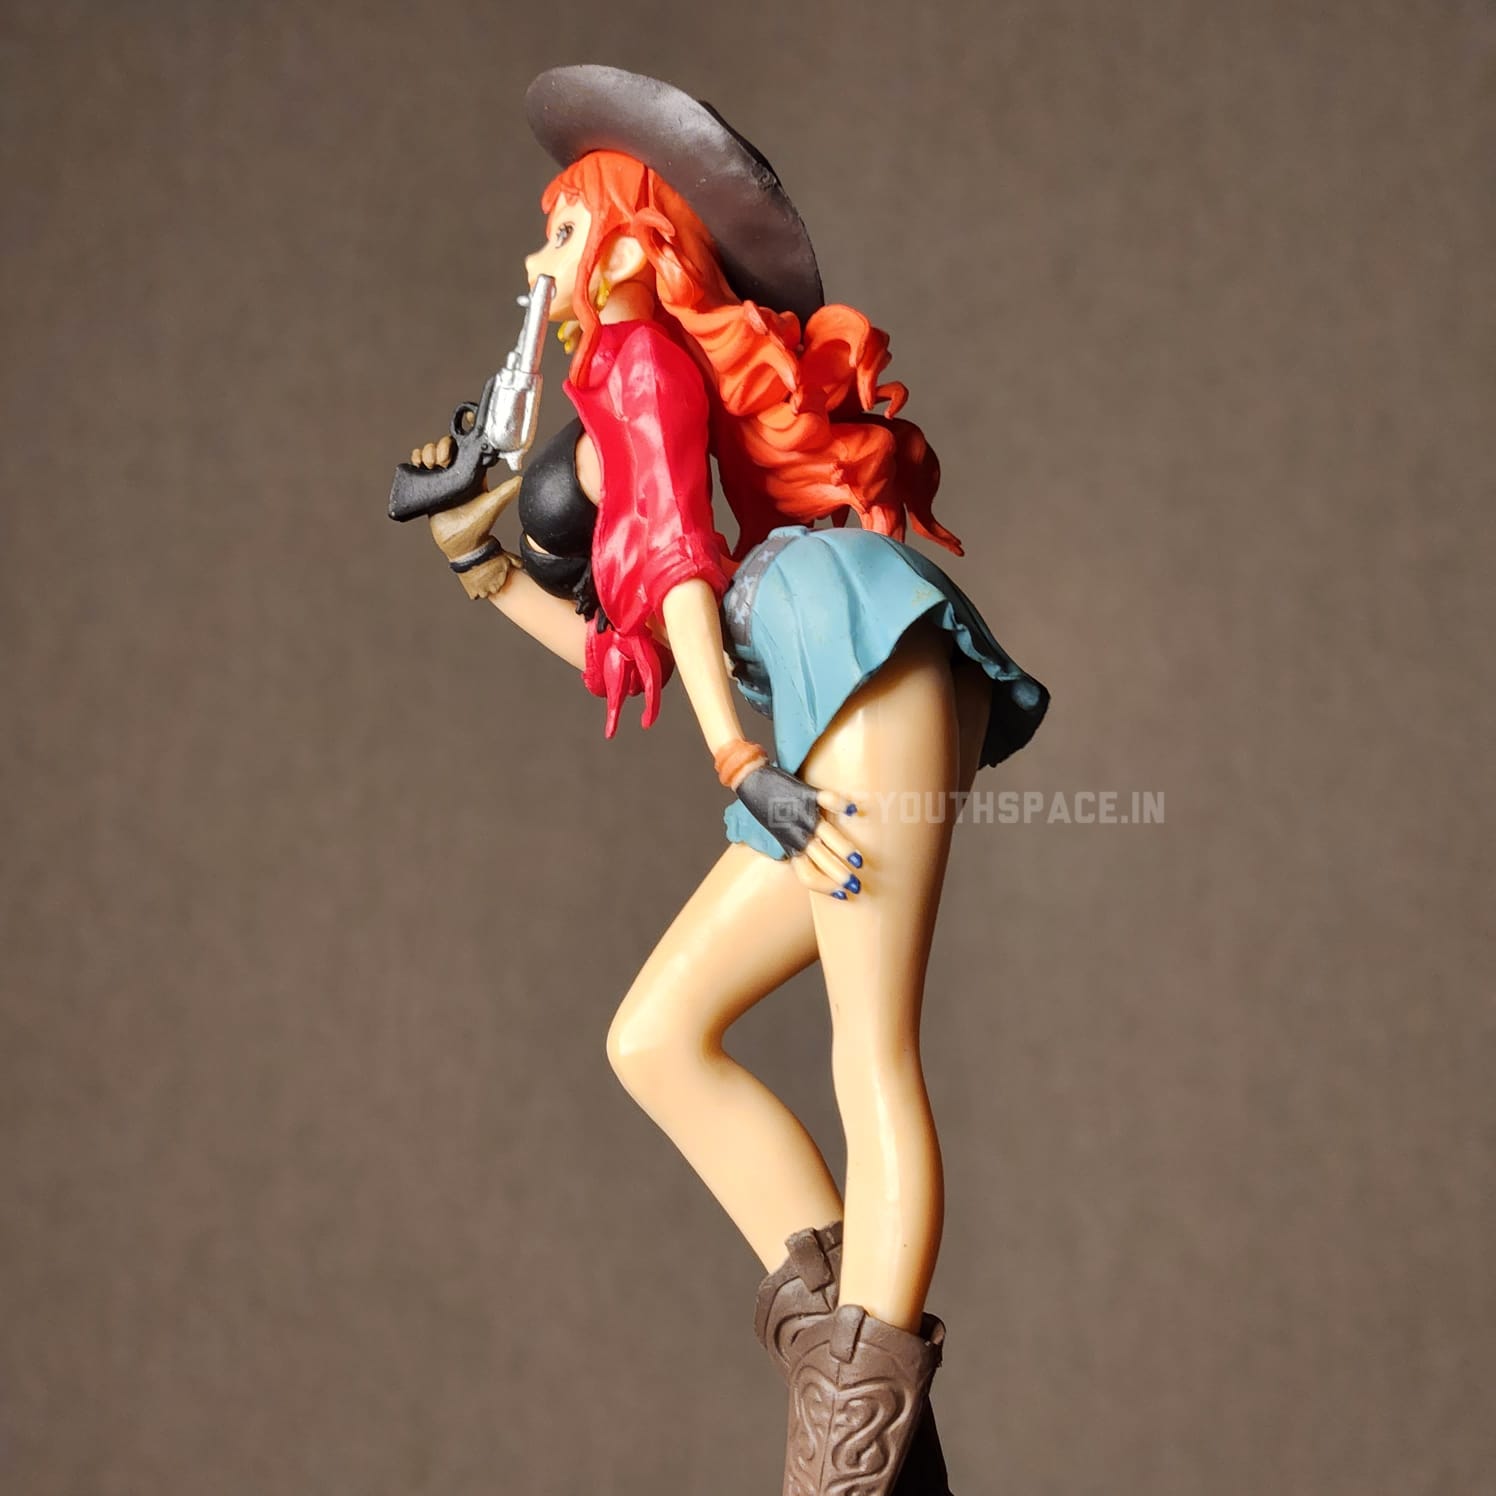 Nami Action figure - One piece